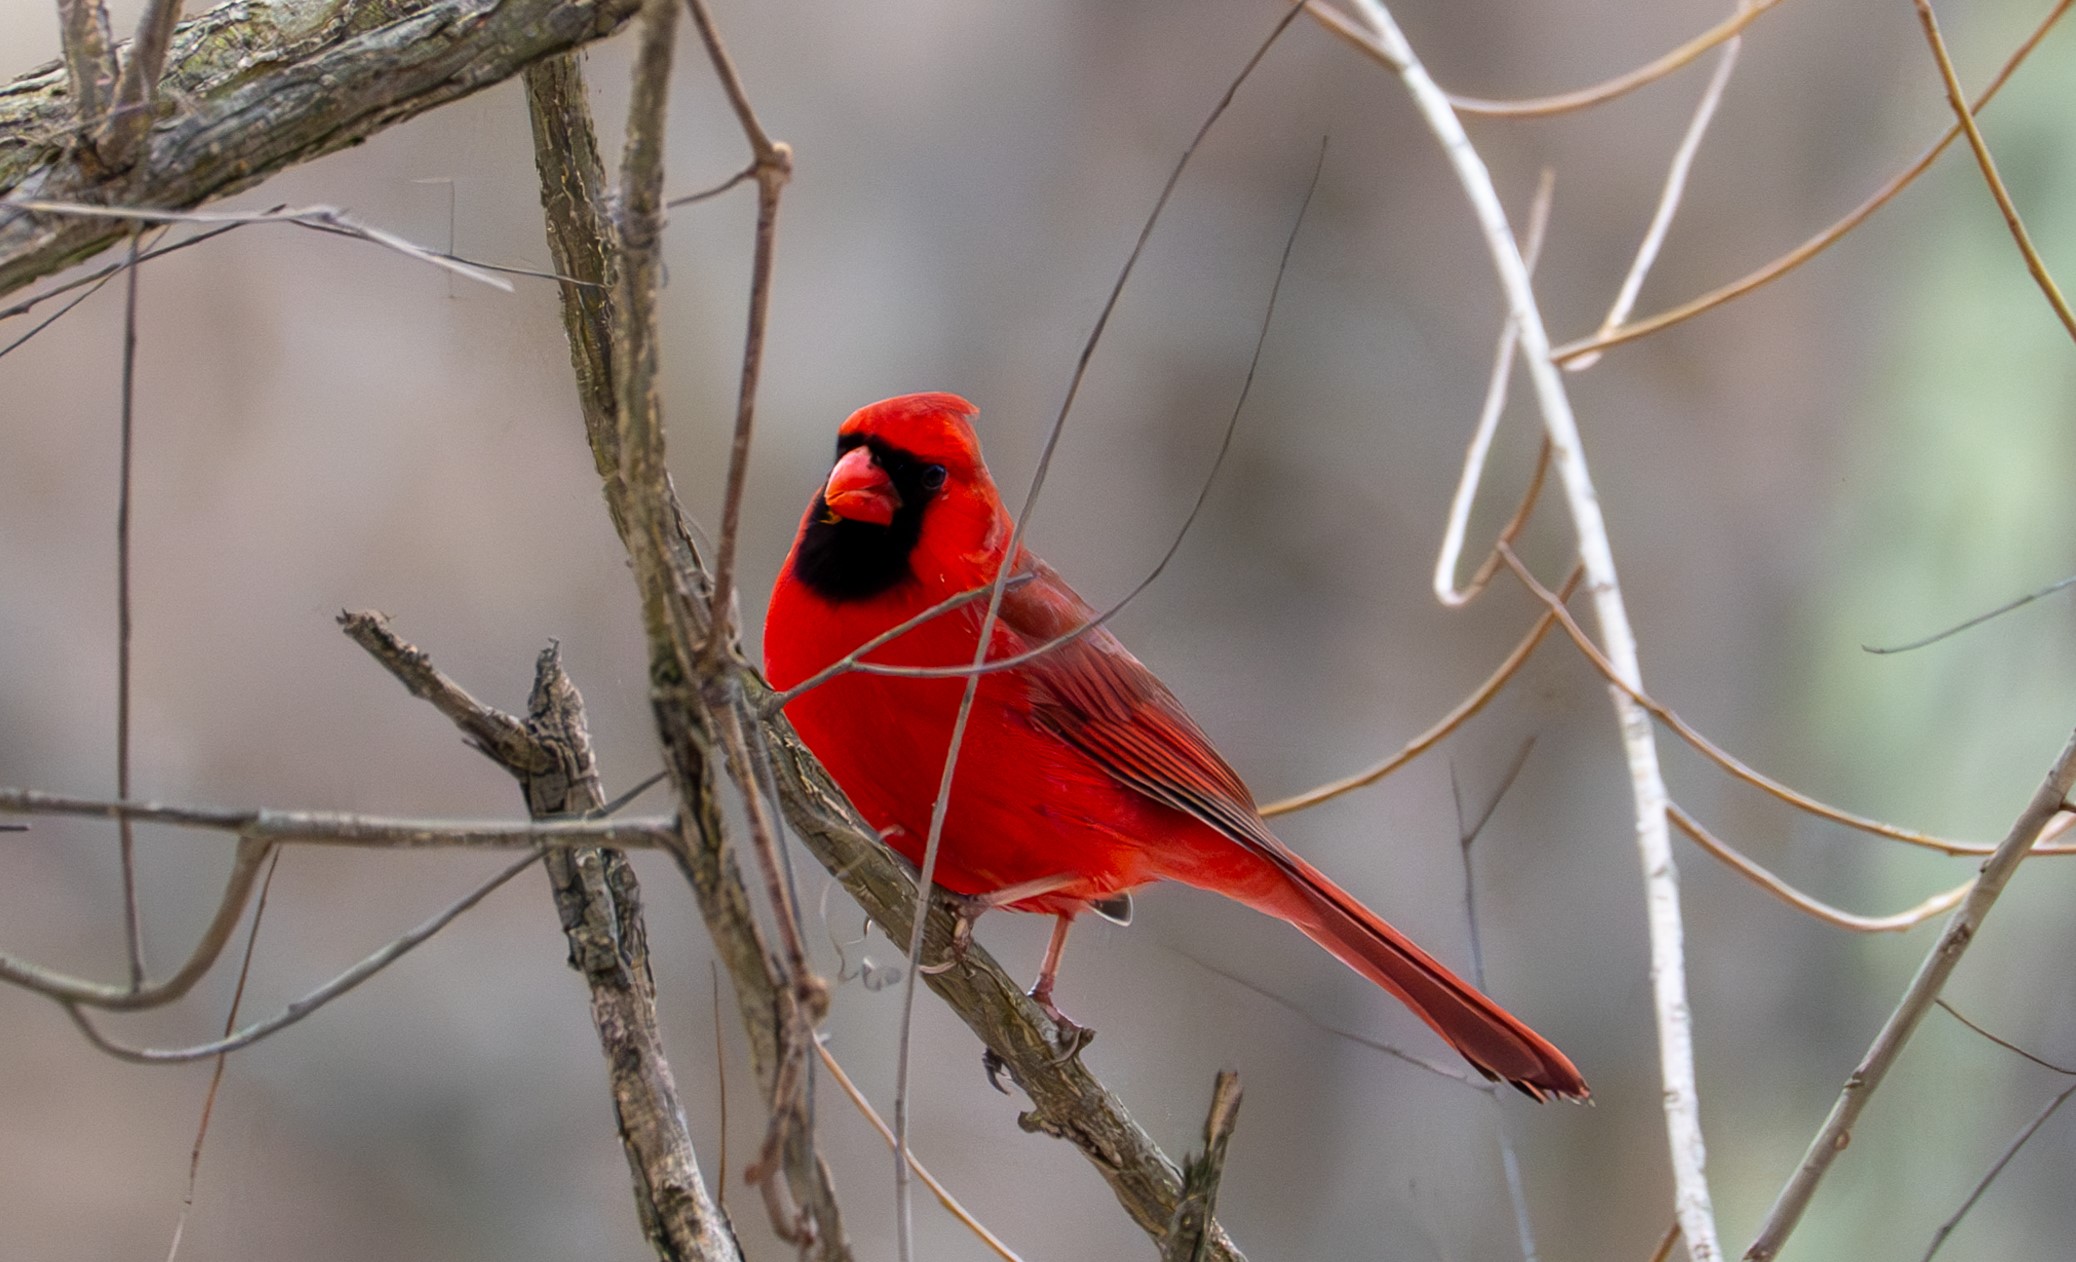 A male Northern Cardinal sits on a branch and looks towards the camera